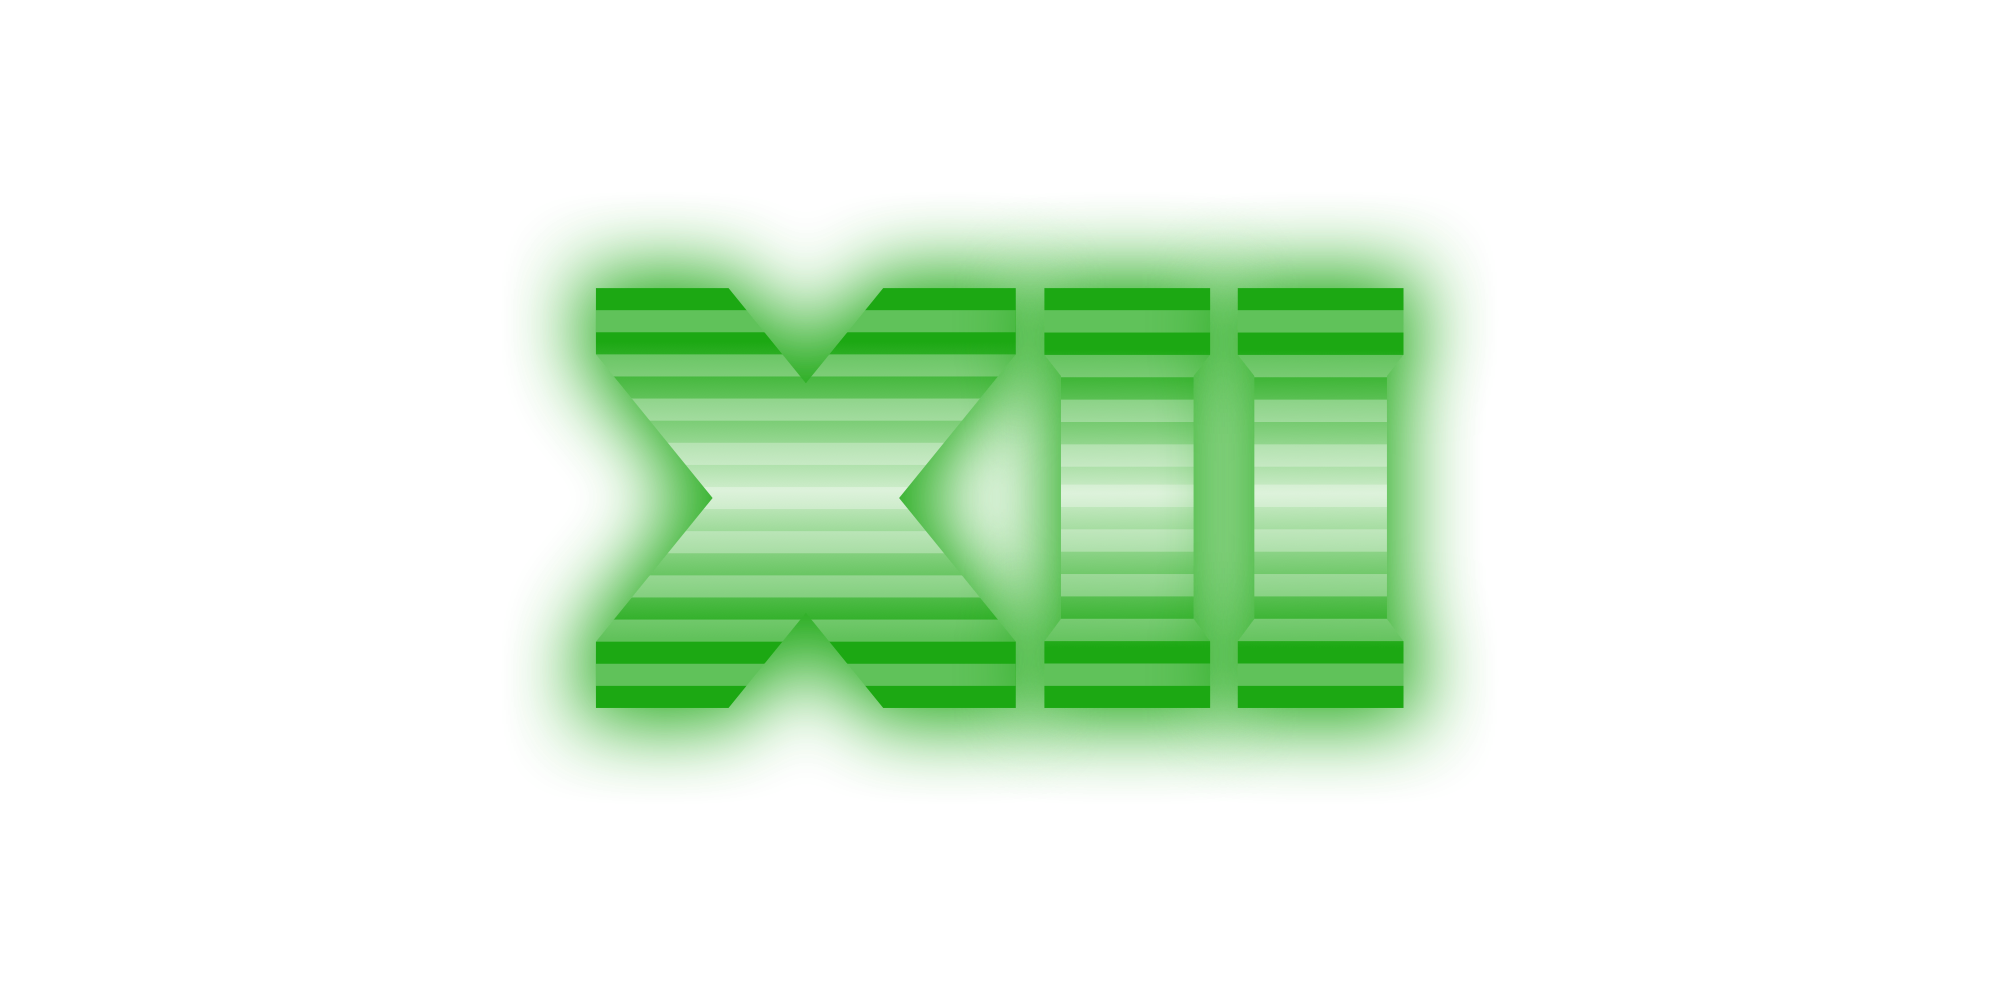 Directx 12 Ultimate Game Ready Driver Released Also Includes Support For 9 New G Sync Compatible Gaming Monitors